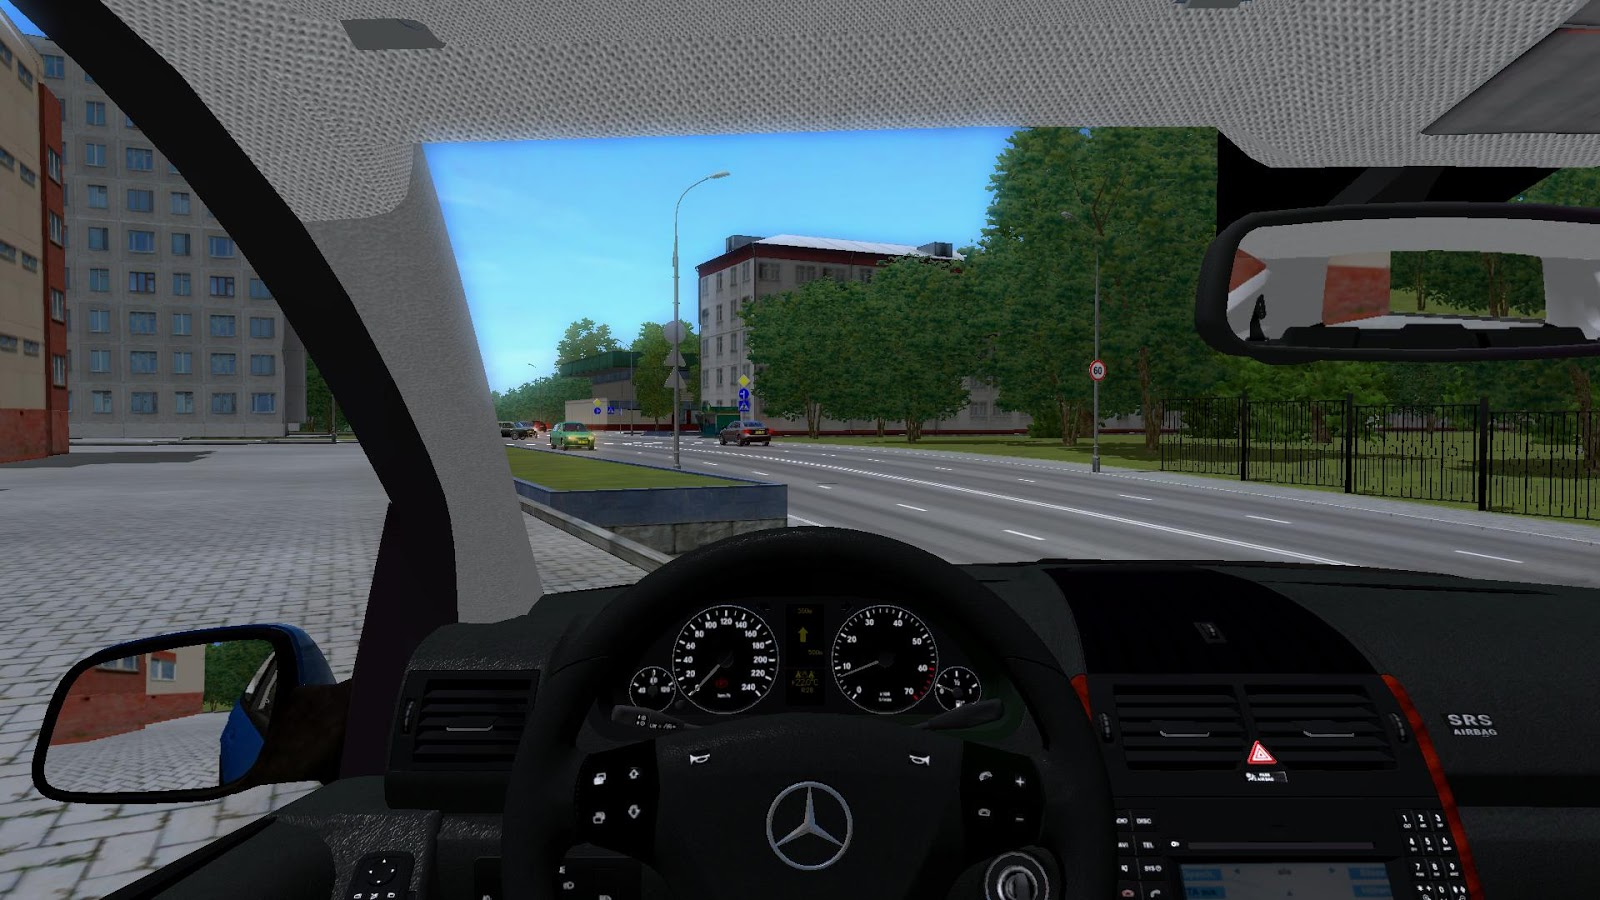 Сити кар драйвинг ключ. City car Driving Mercedes-Benz a200 Coupe. Mercedes a 200 City car Driving. Mercedes e200 Coupe City car Driving Simulator. City car Driving Simulator 2.